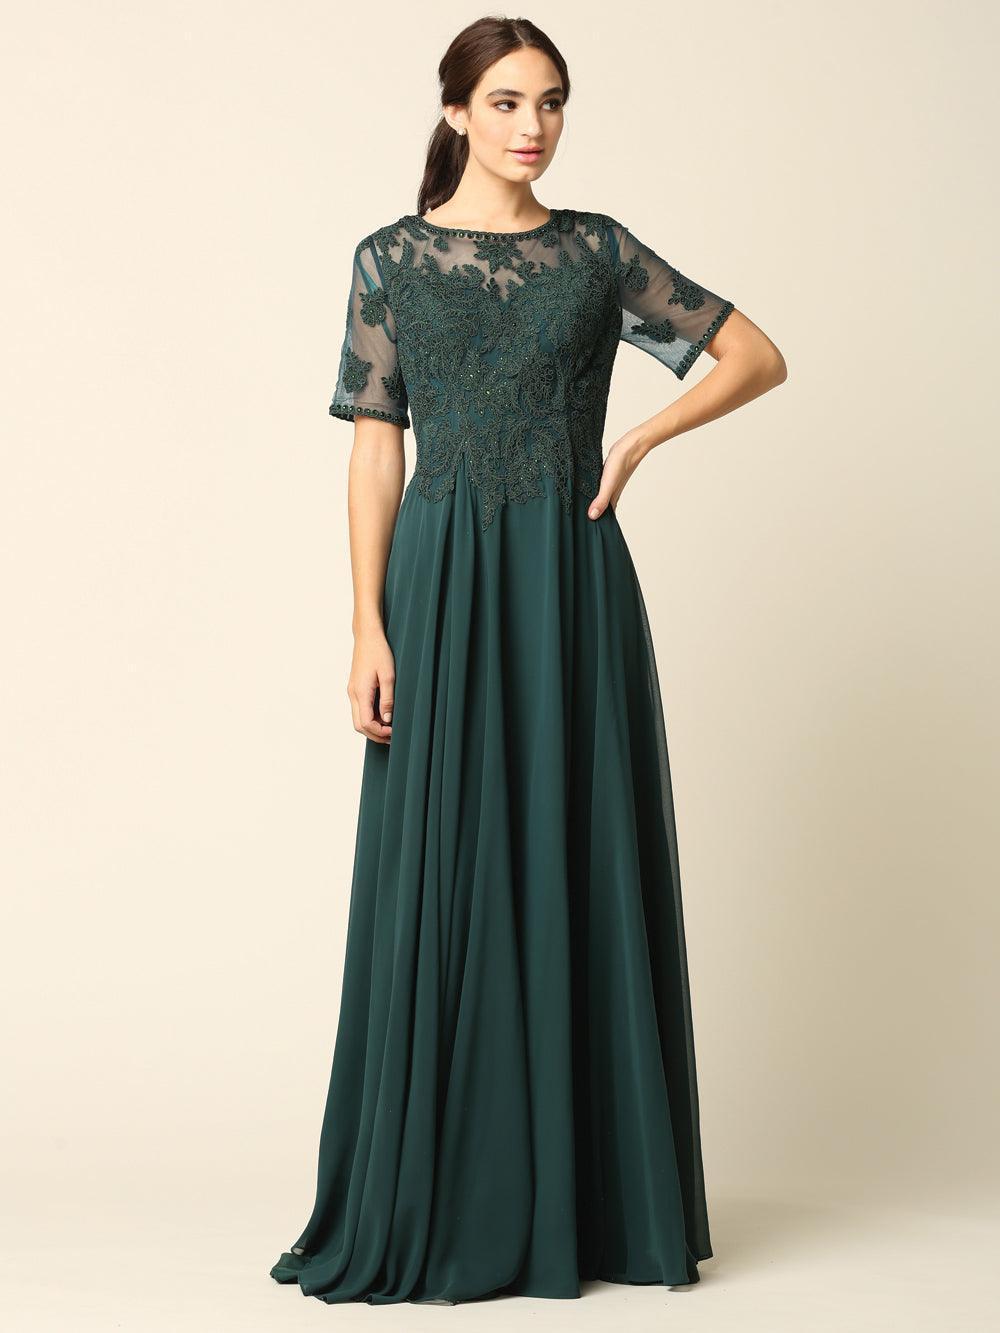 Formal Mother of the Bride Long Lace Chiffon Dress Sale - The Dress Outlet